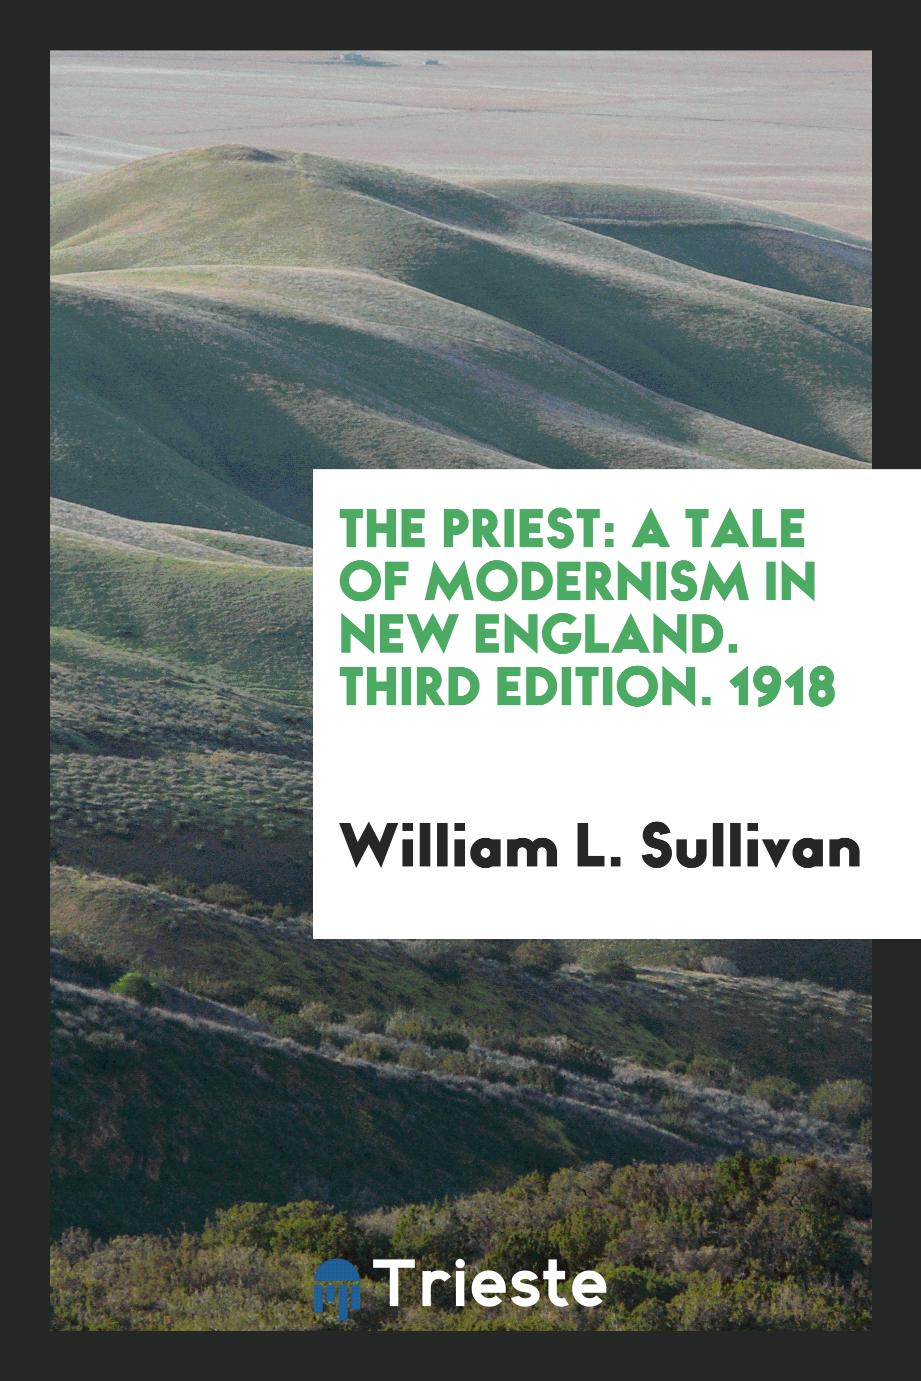 The Priest: A Tale of Modernism in New England. Third Edition. 1918